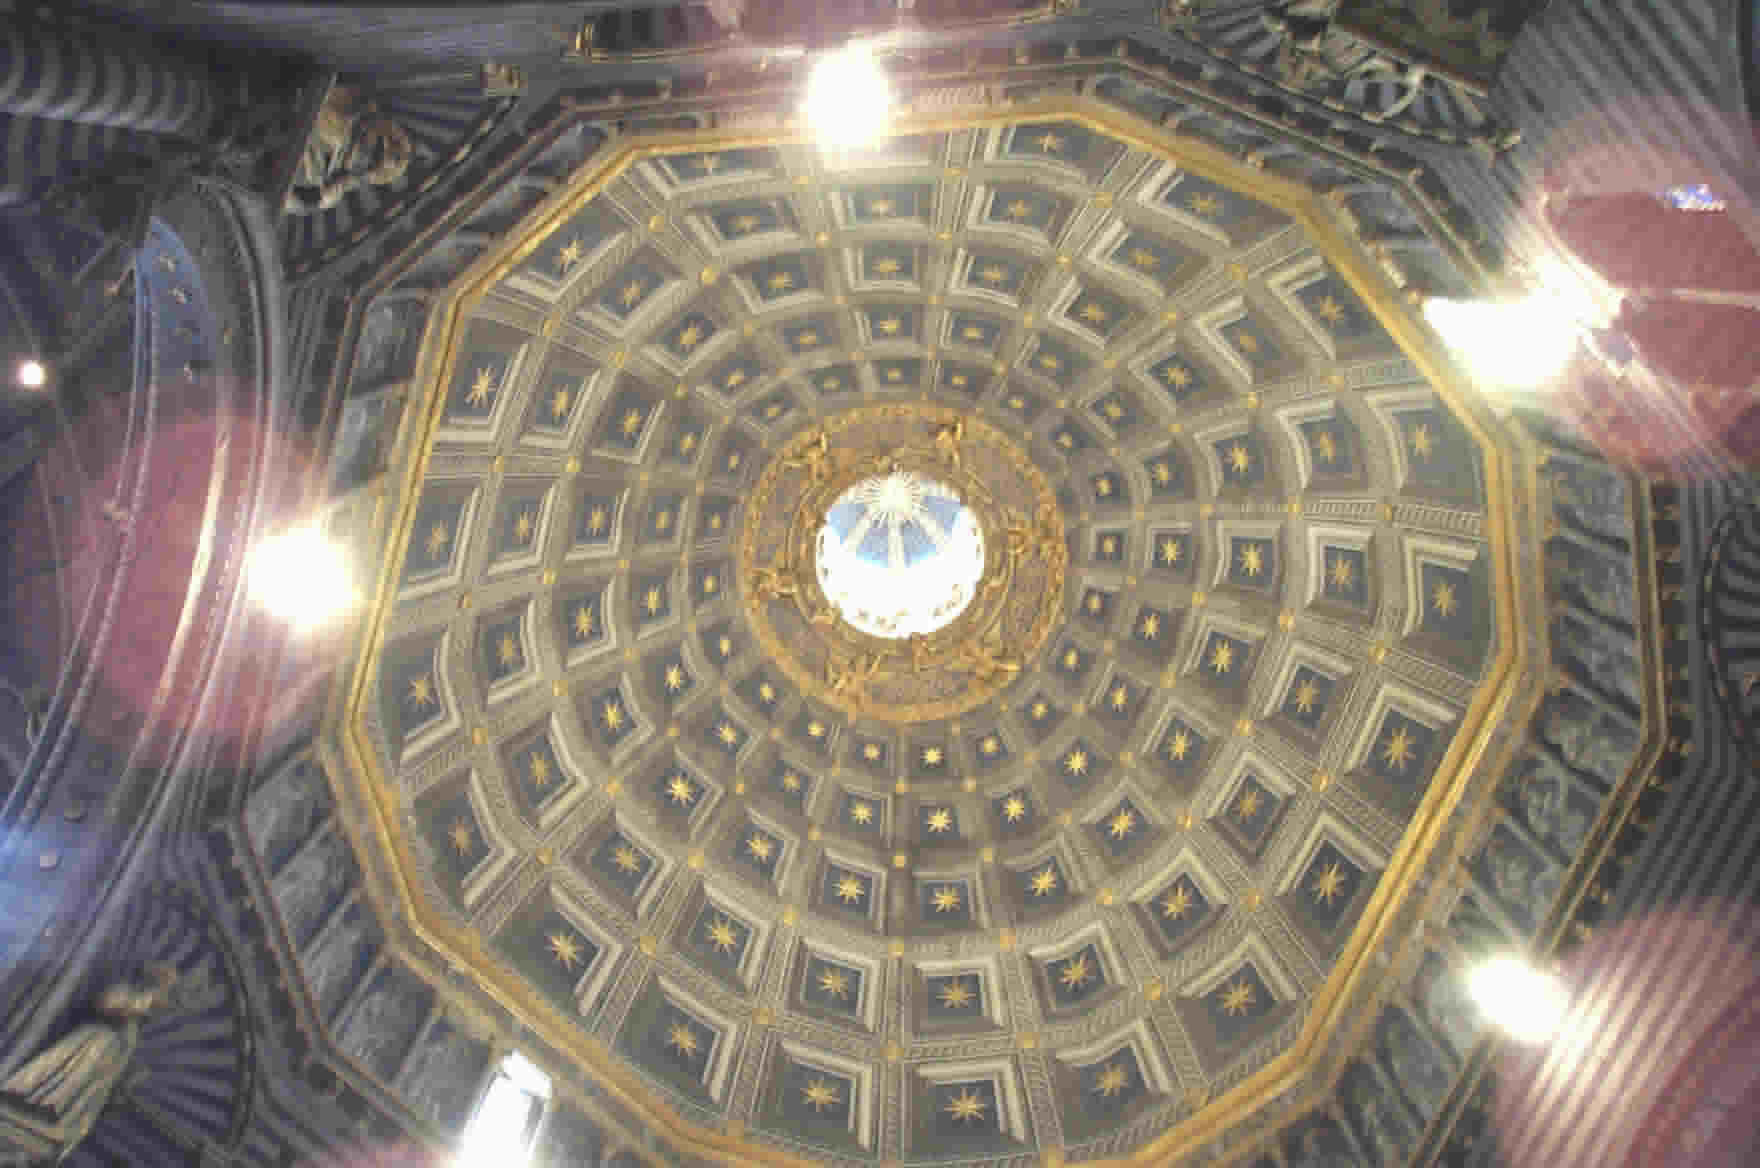 Dome with stars